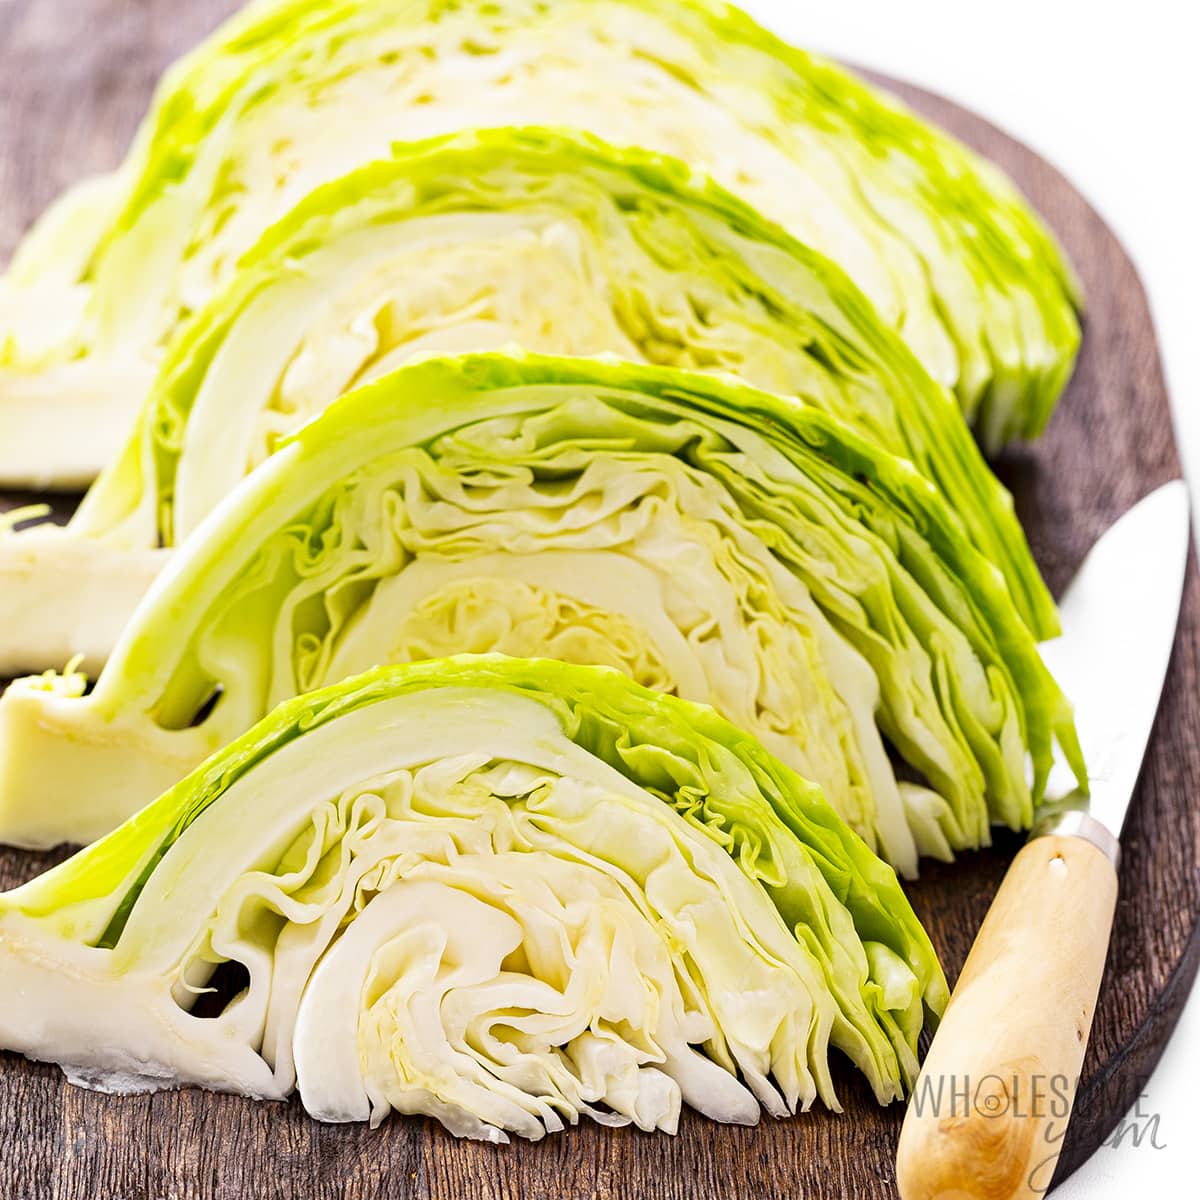 Cabbage cut into wedges on a cutting board.